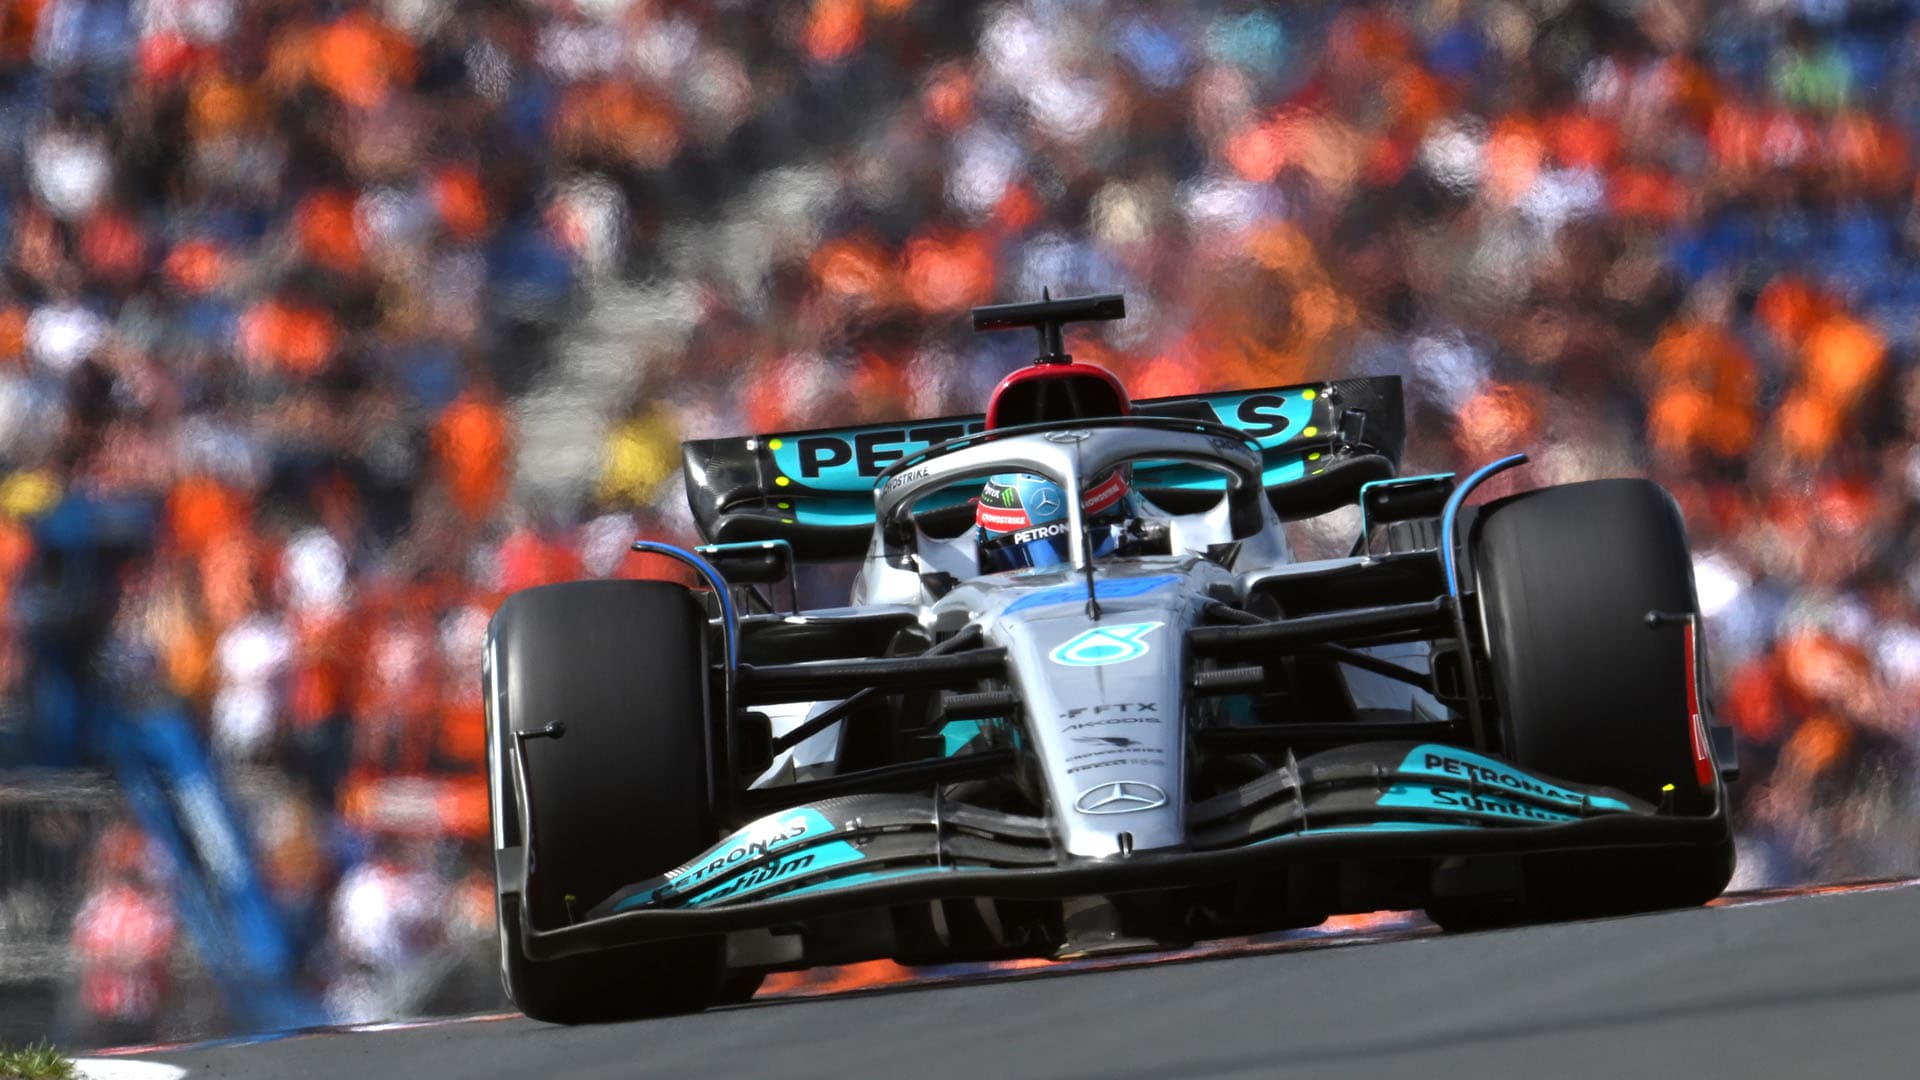 2022 Dutch Grand Prix FP1 report and highlights Russell heads Mercedes 1-2 as Verstappen suffers issue in Dutch GP first practice Formula 1®